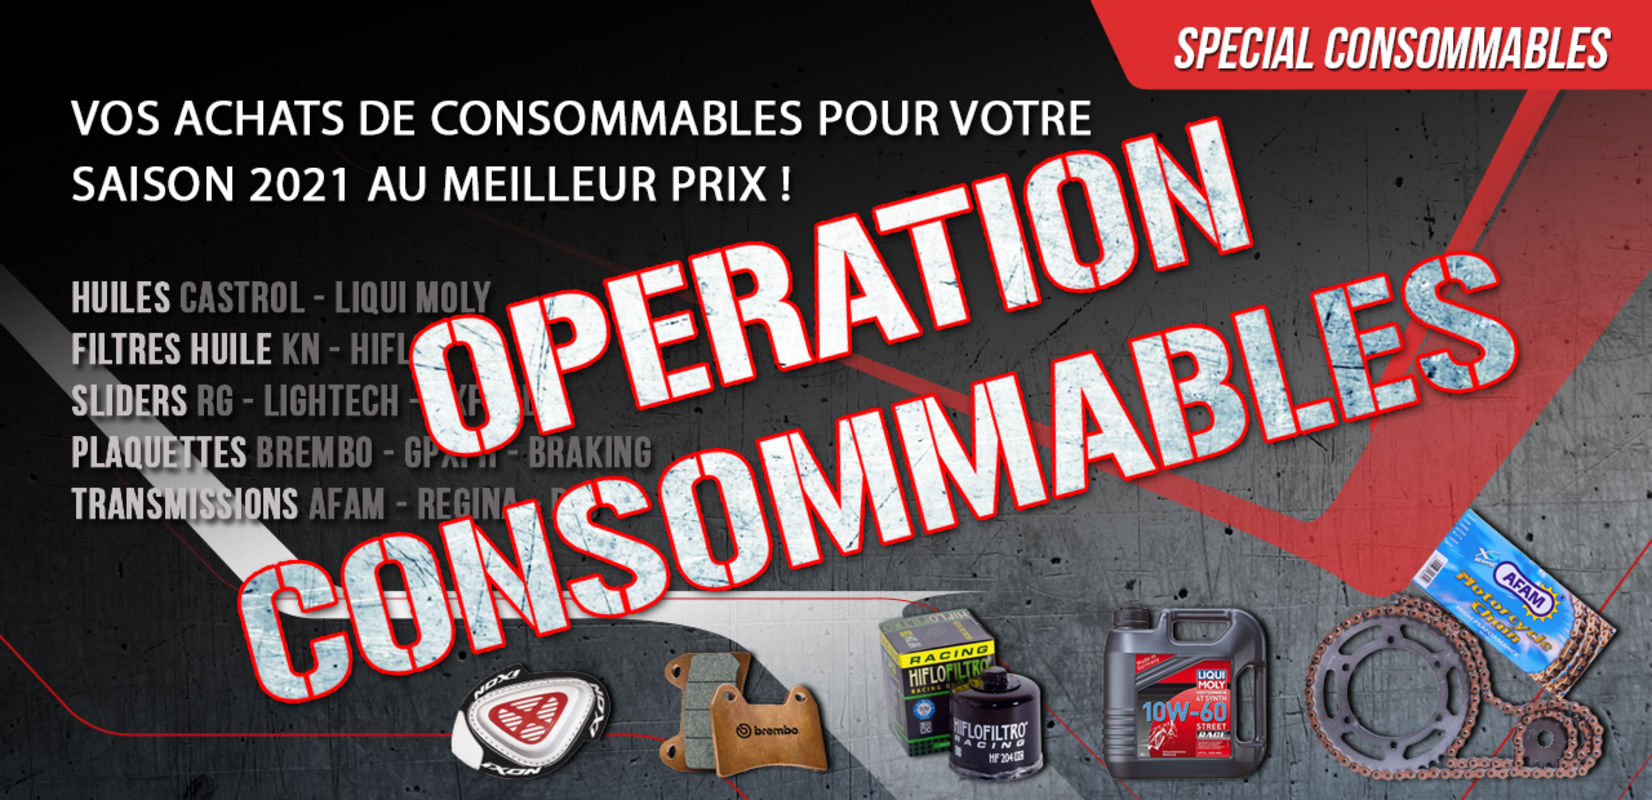 Opération consommables